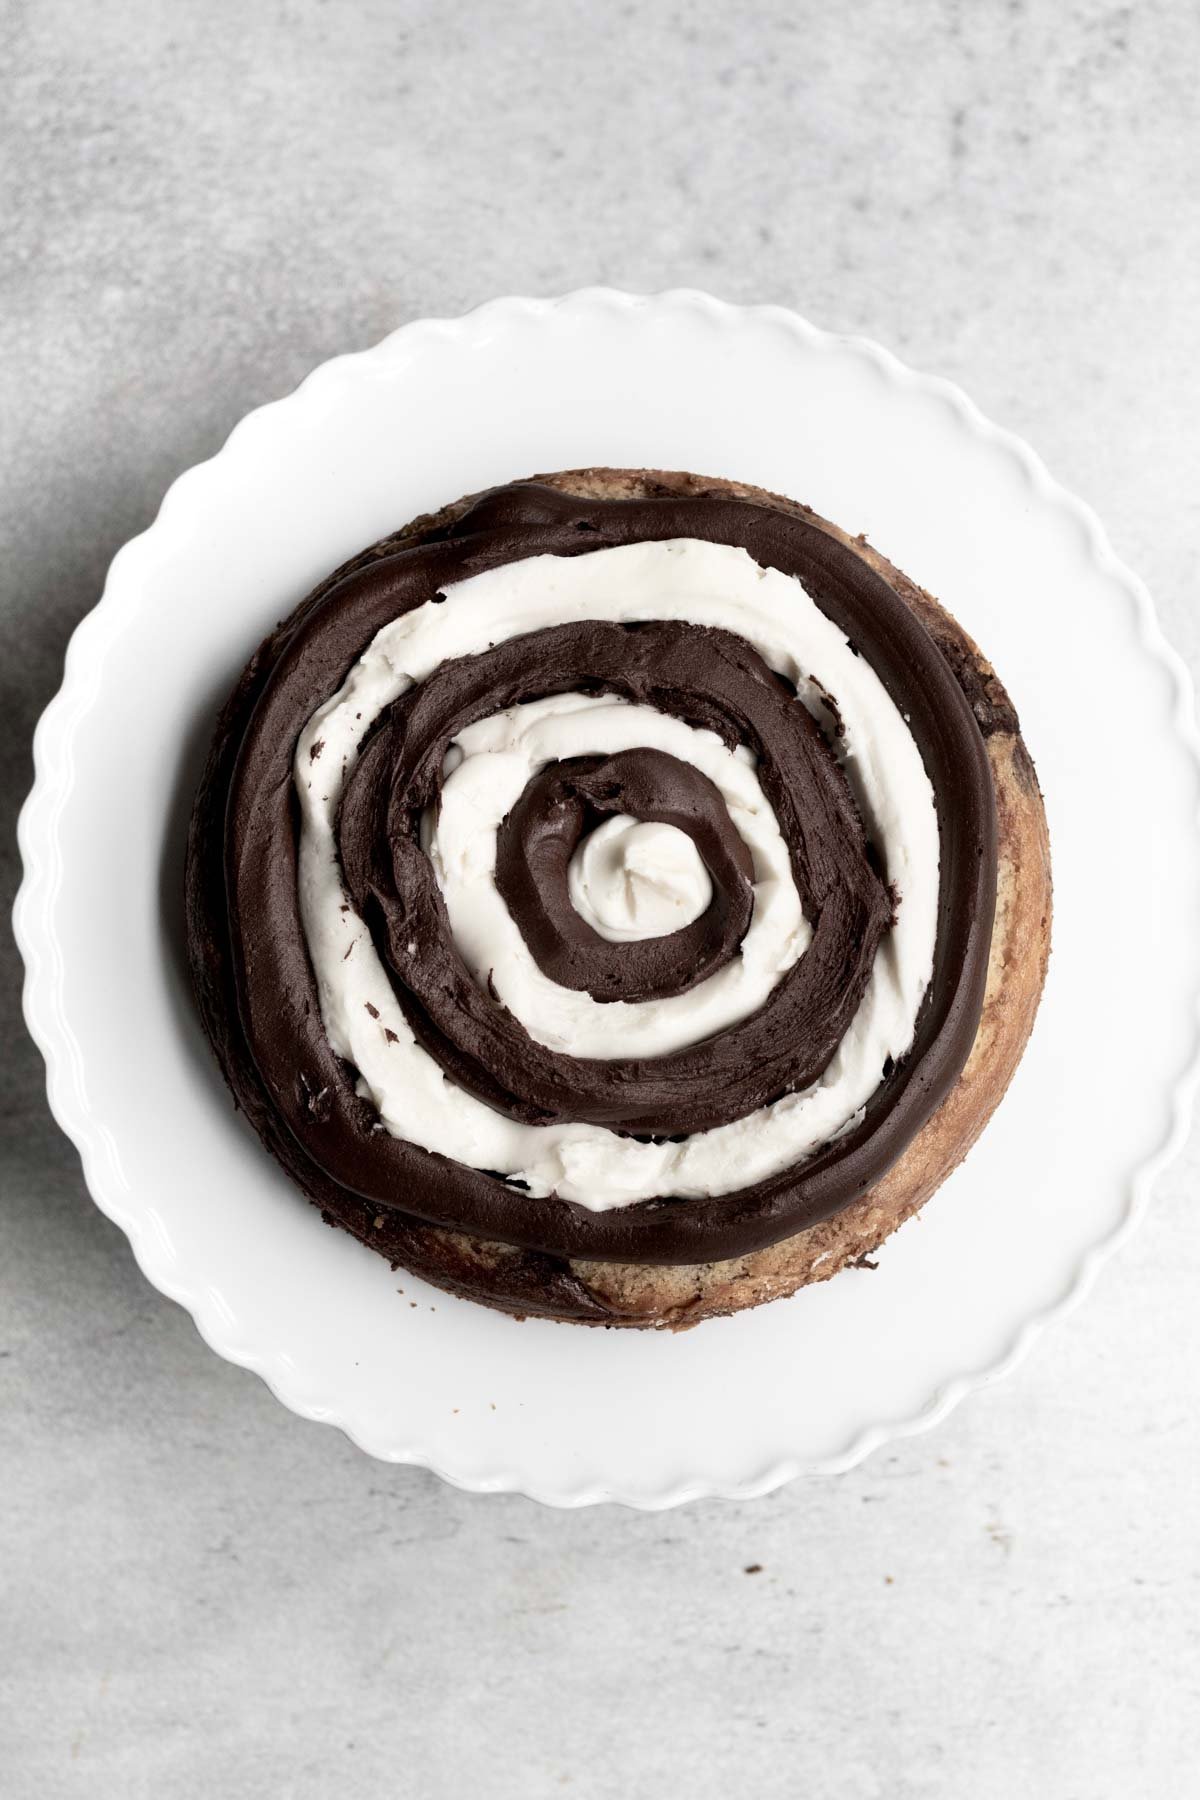 Alternating concentric circles of chocolate and vanilla frosting on the cake.